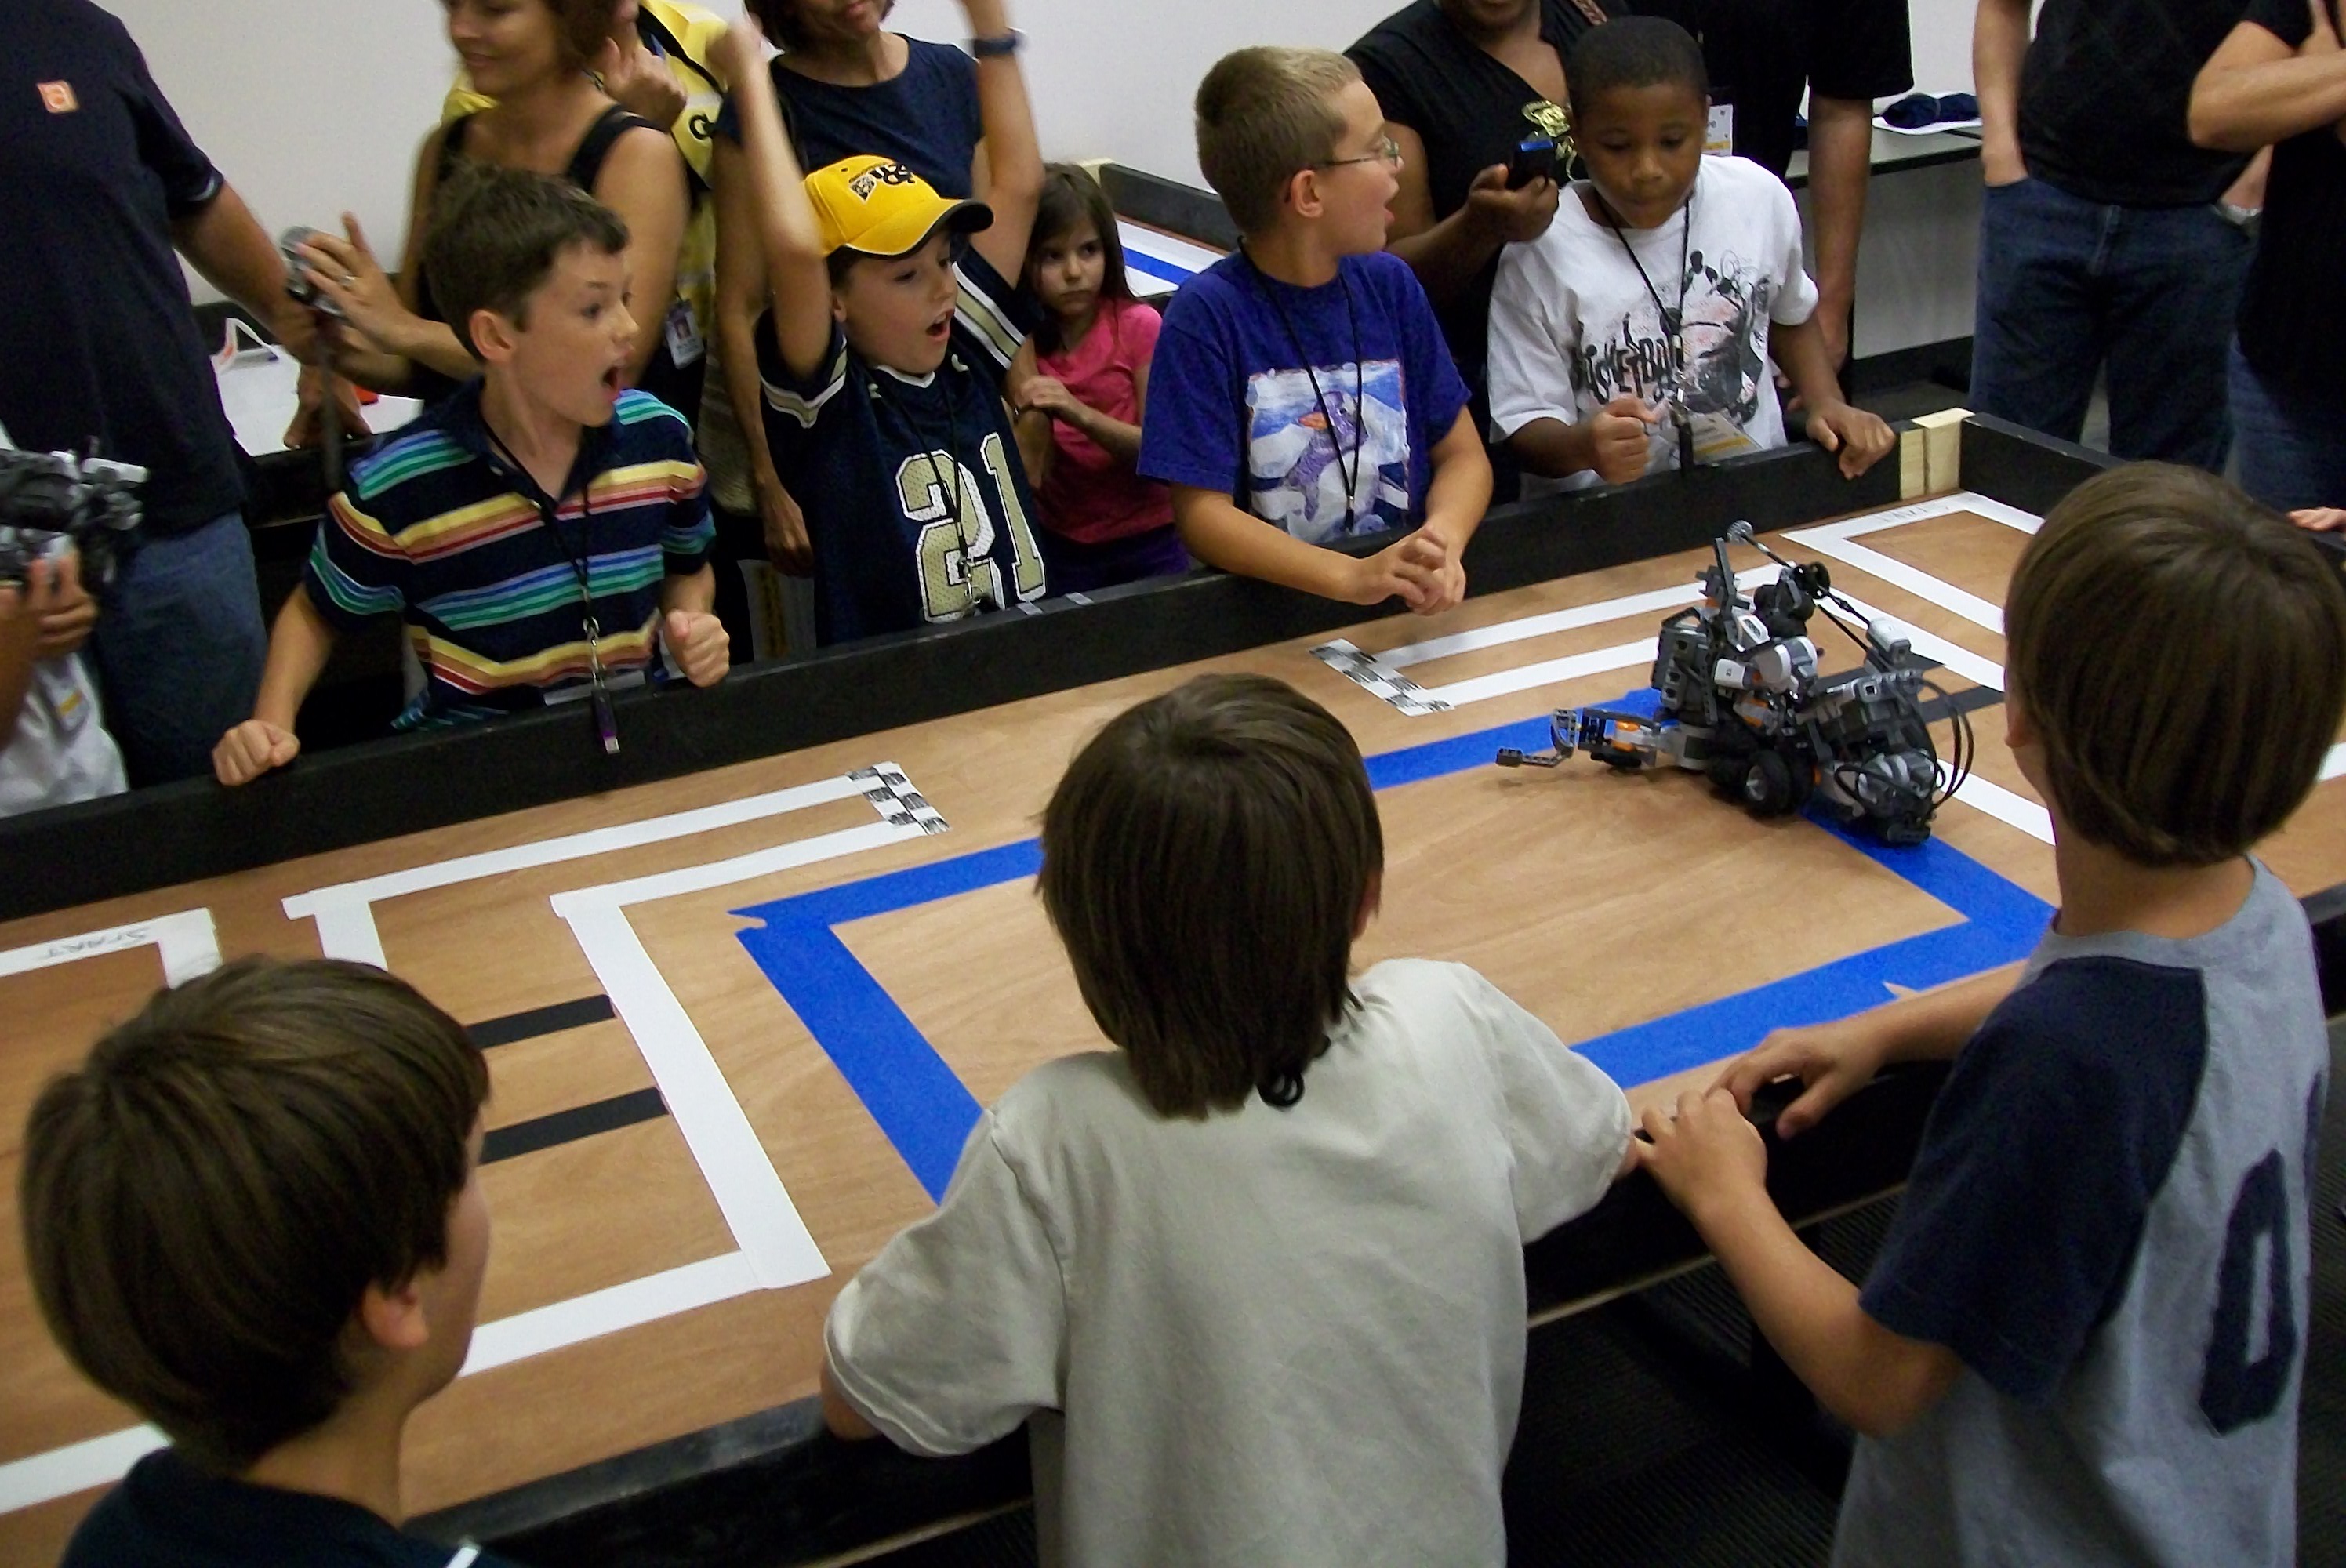 Students participating in FIRST LEGO League